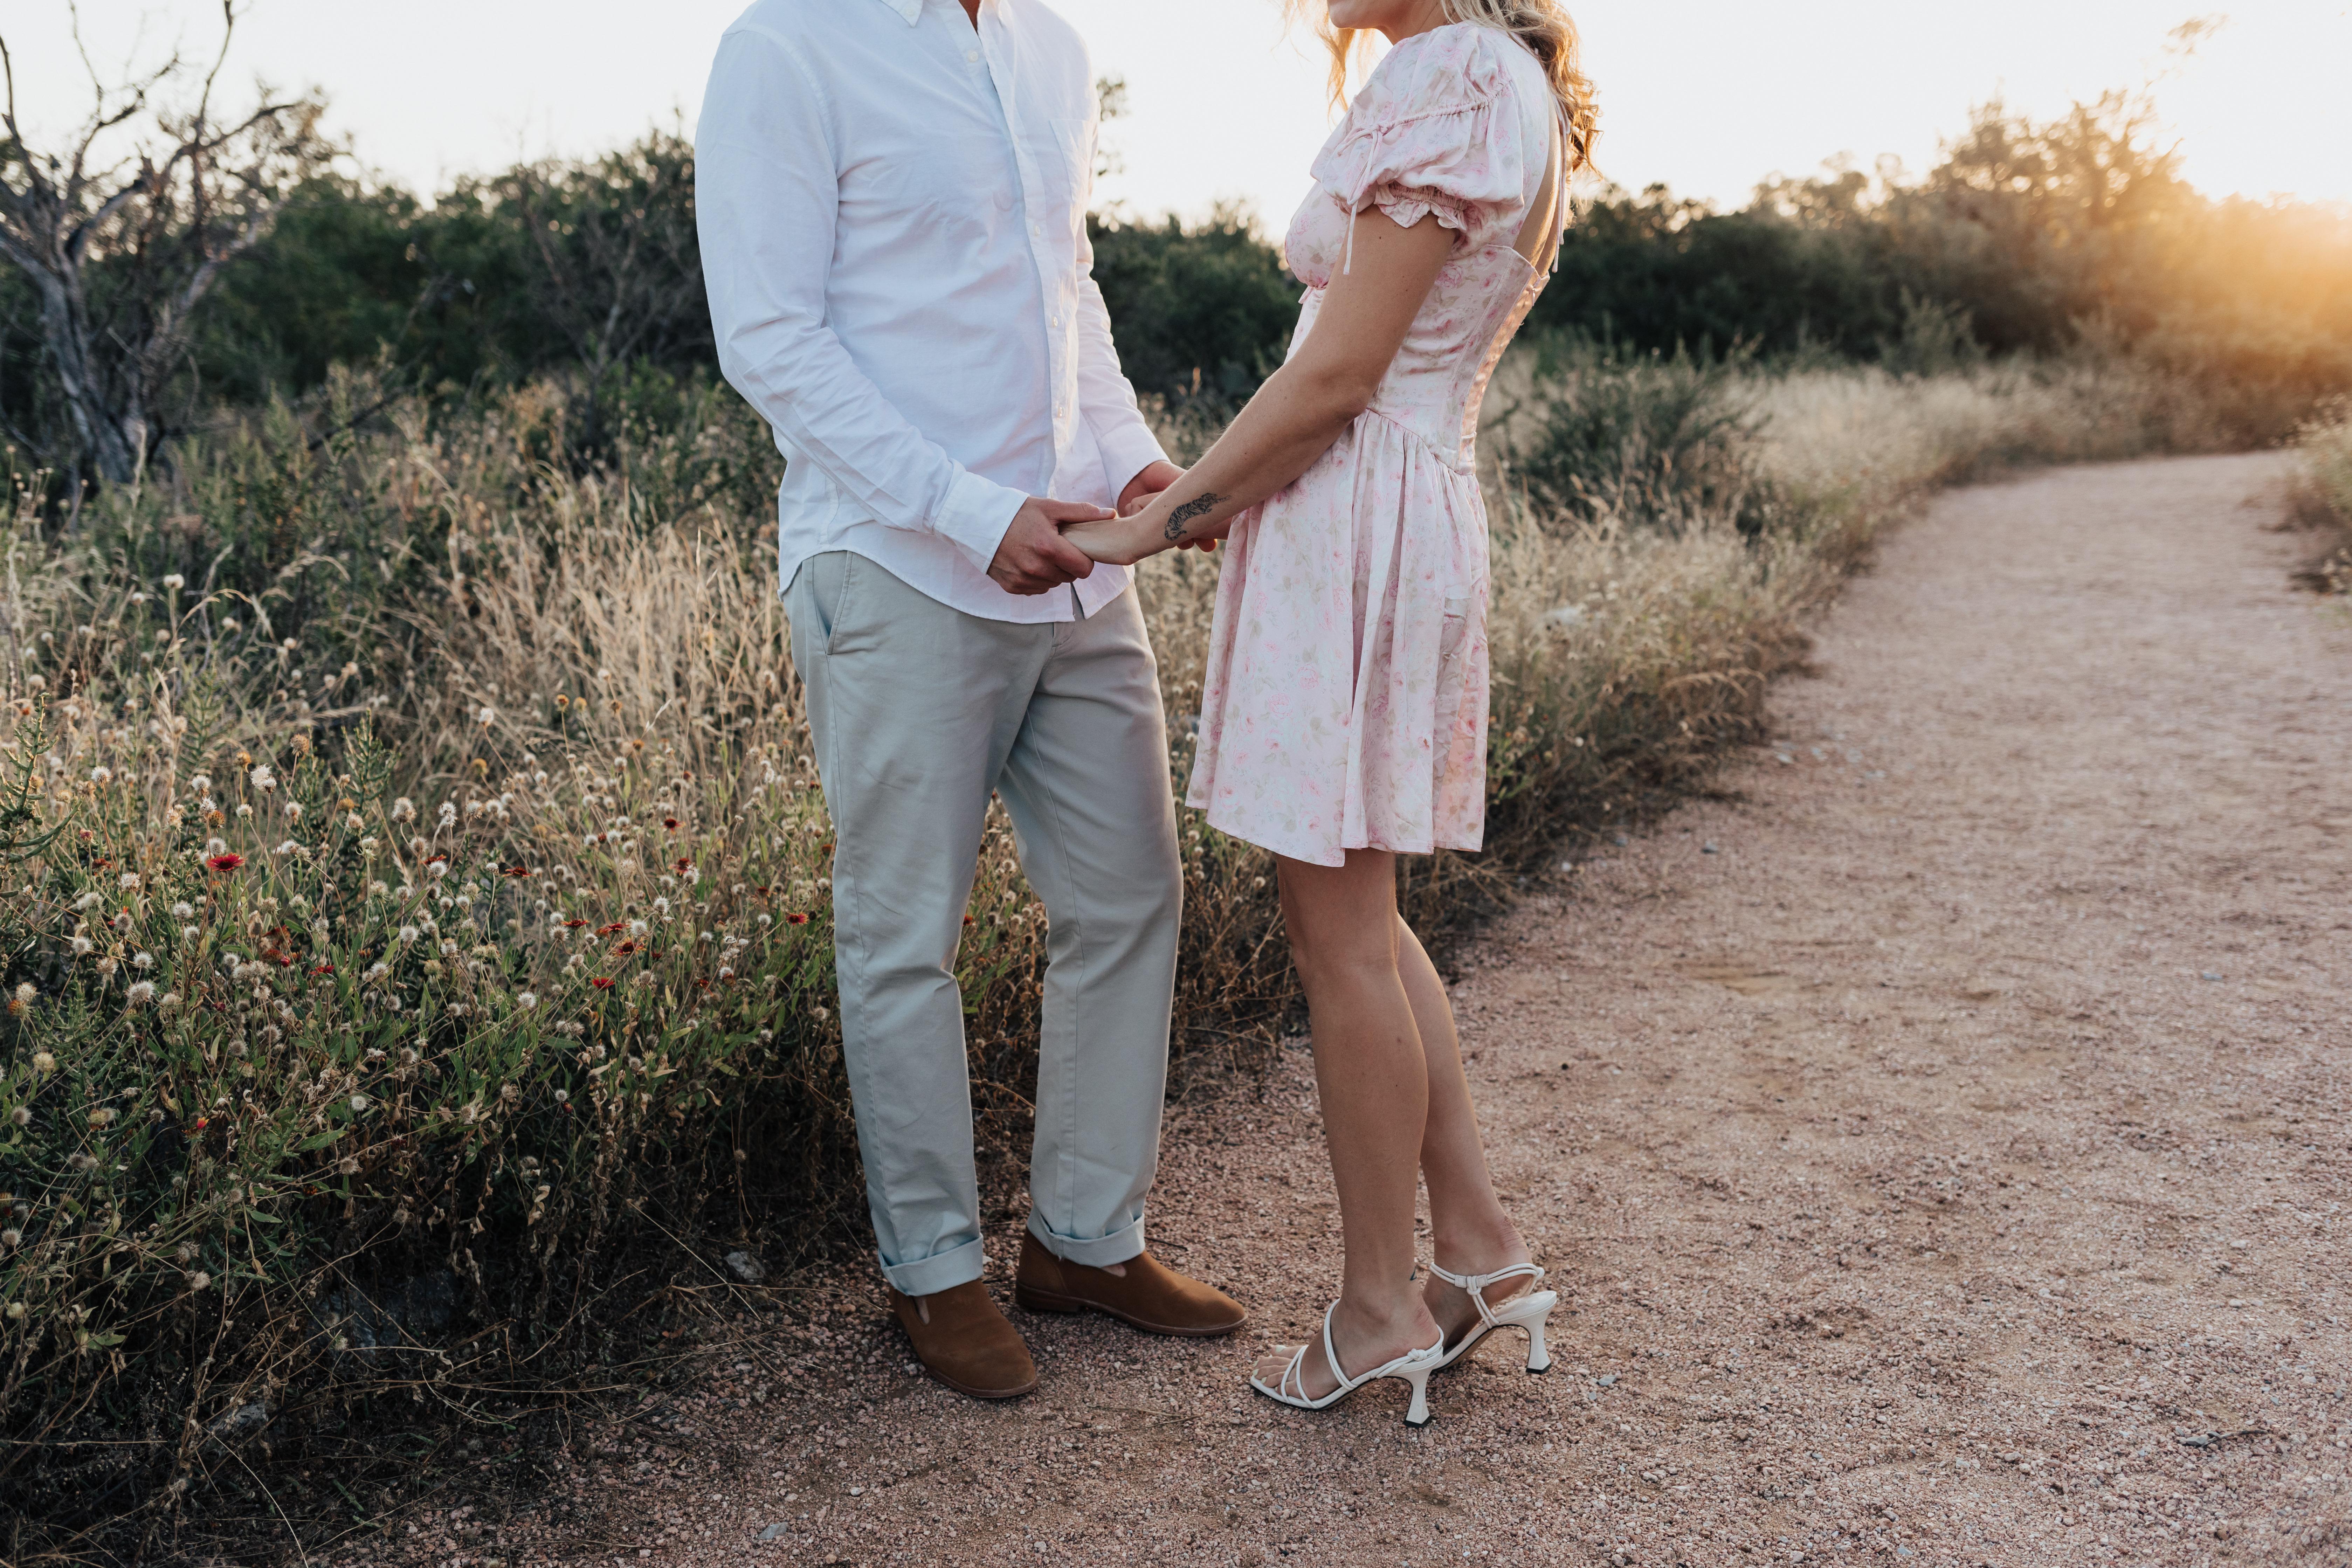 The Wedding Website of Cait Lower and Jake Bergal